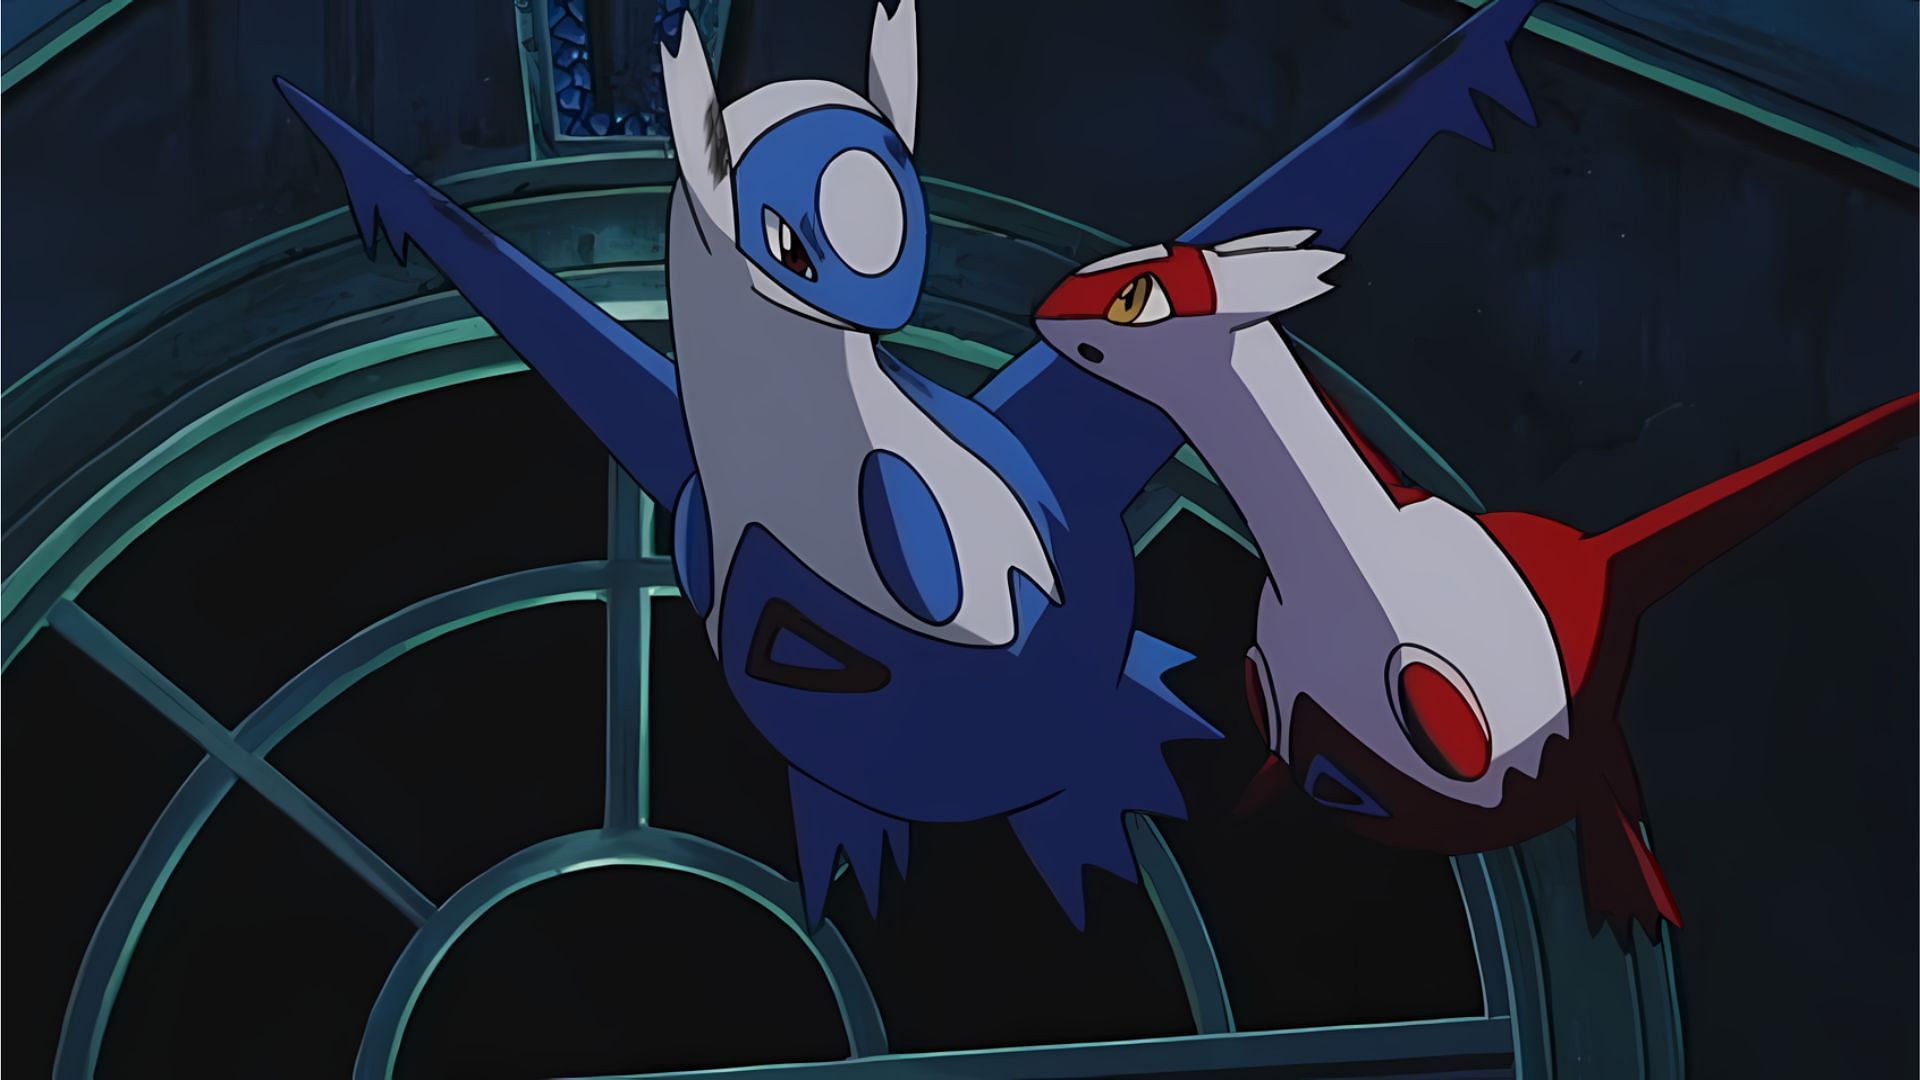 The Eon duo as seen in the anime (Image via TPC)